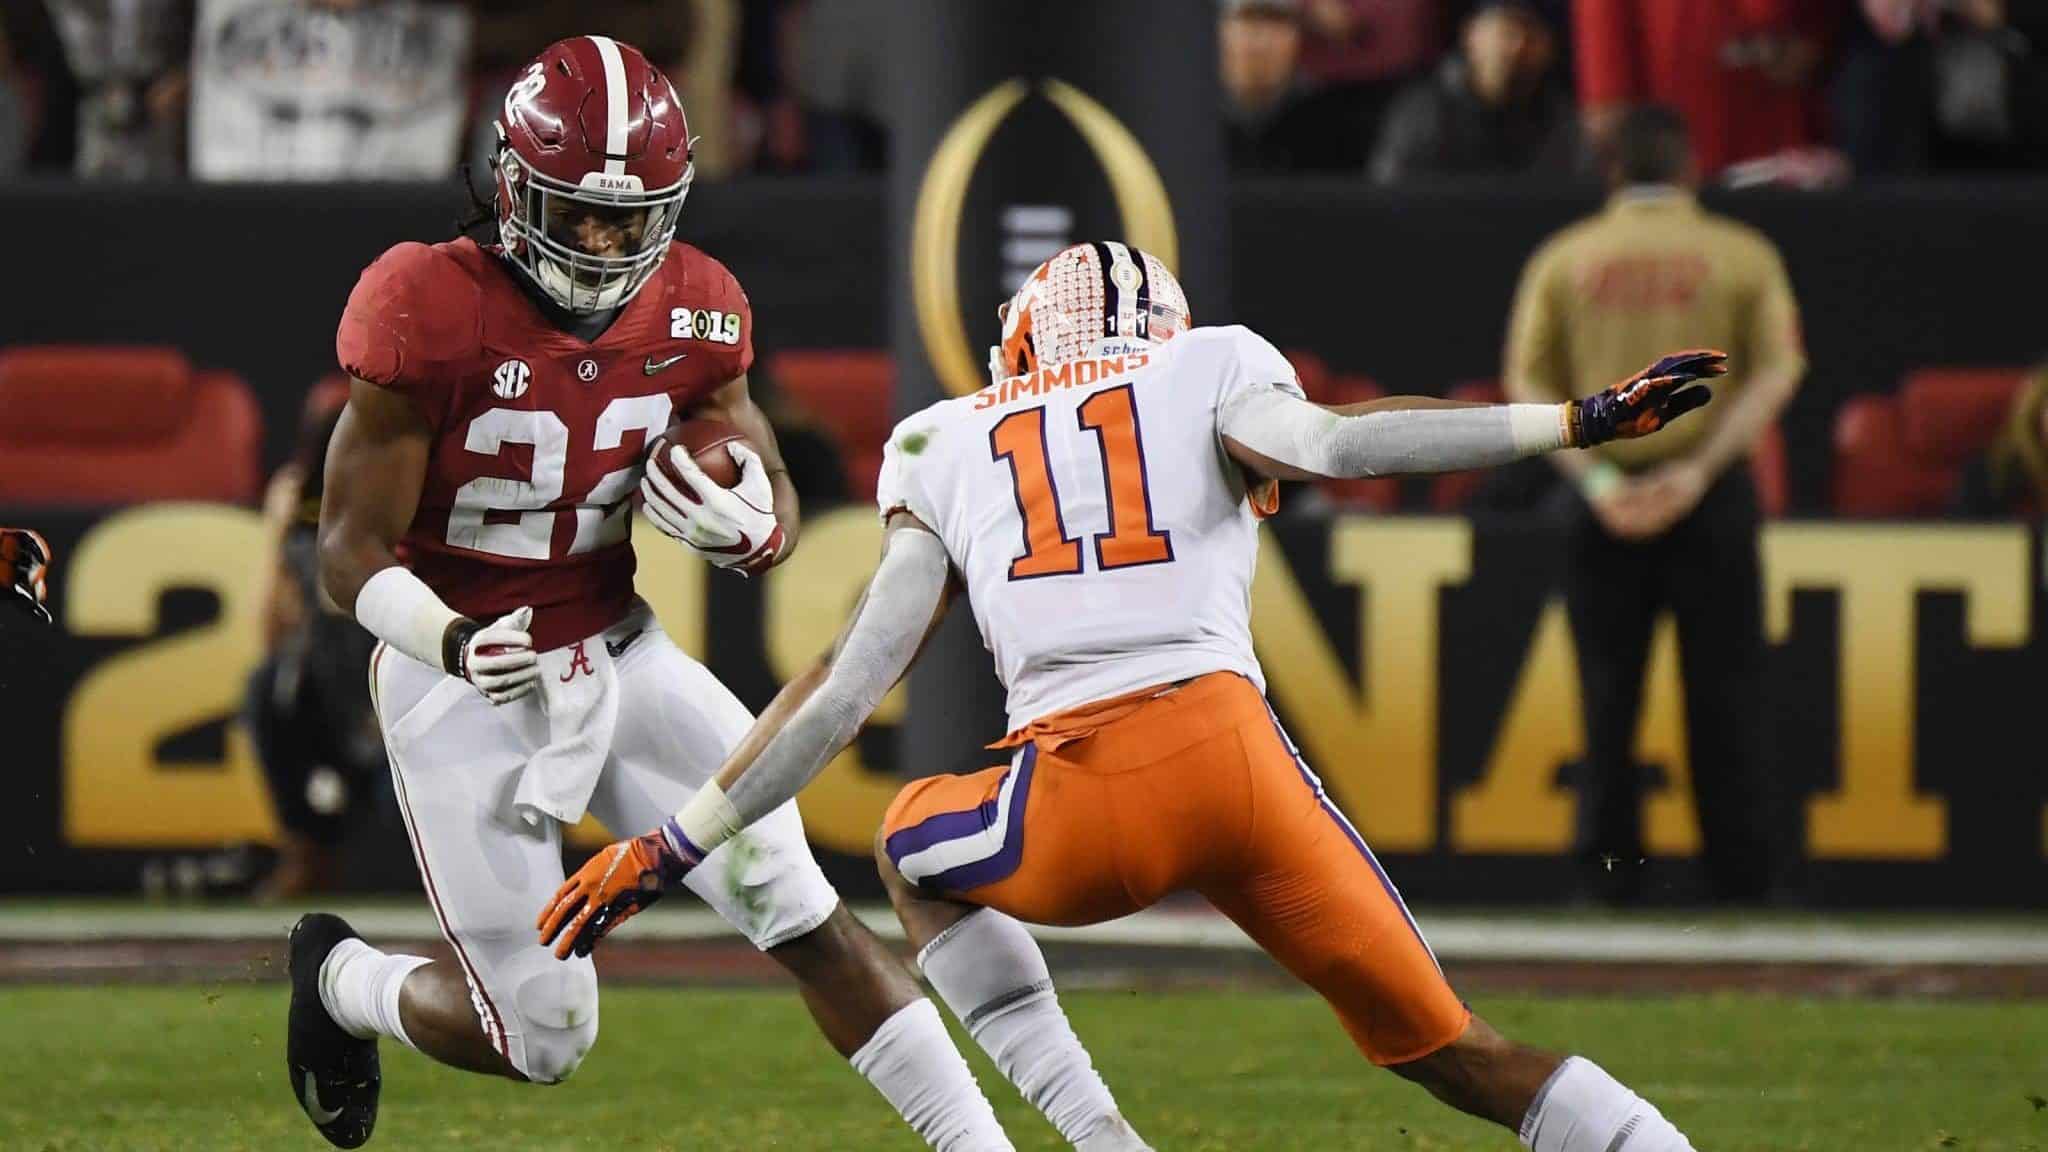 SANTA CLARA, CA - JANUARY 07: Najee Harris #22 of the Alabama Crimson Tide runs against Isaiah Simmons #11 of the Clemson Tigers in the CFP National Championship presented by AT&T at Levi's Stadium on January 7, 2019 in Santa Clara, California.